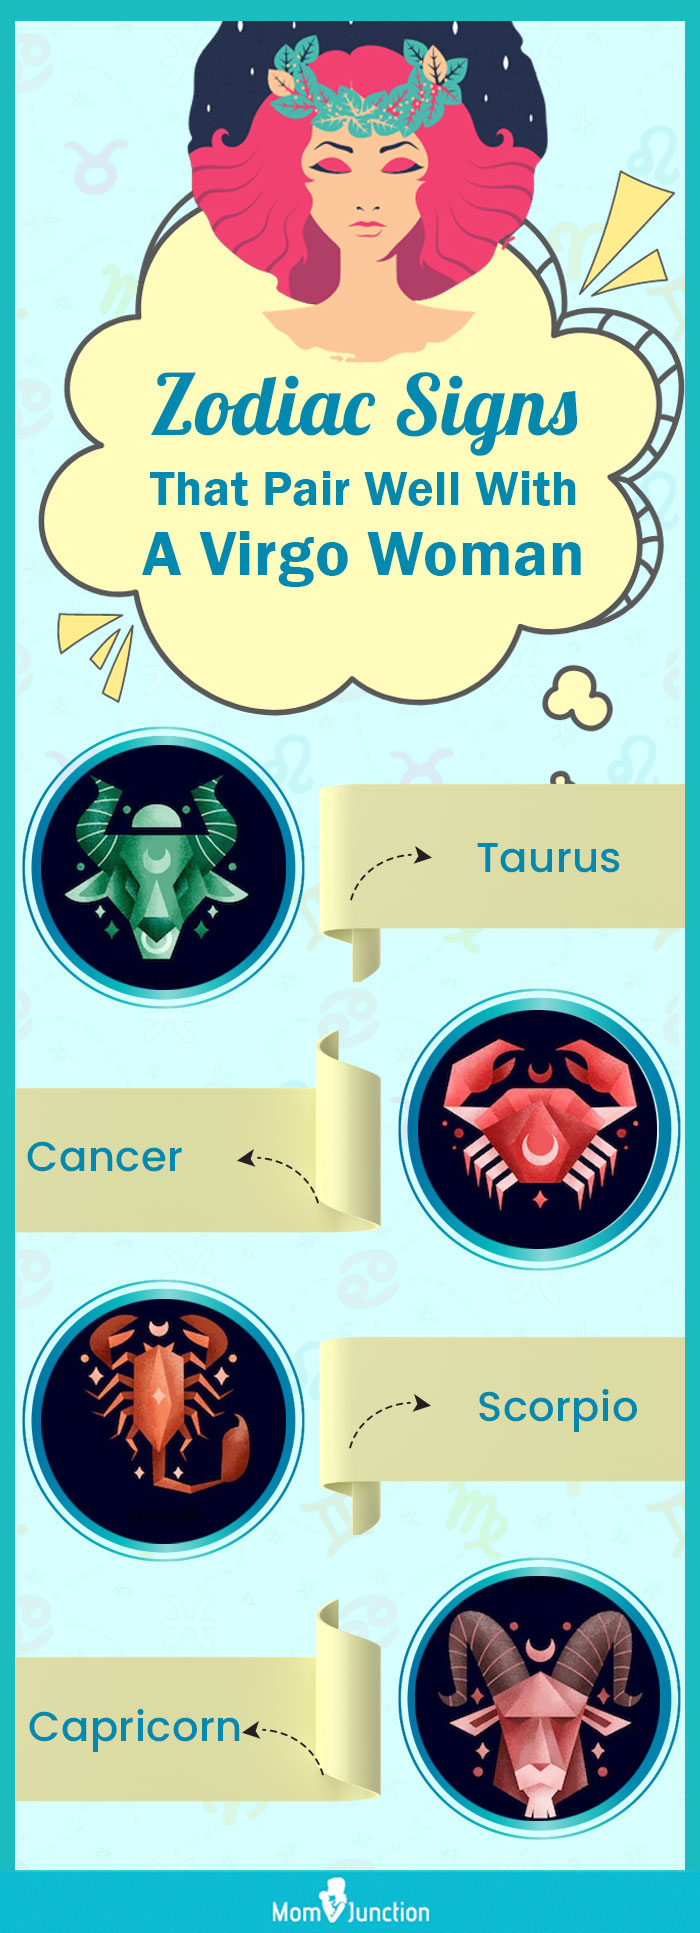 zodiac signs that pair well with a virgo woman(infographic)